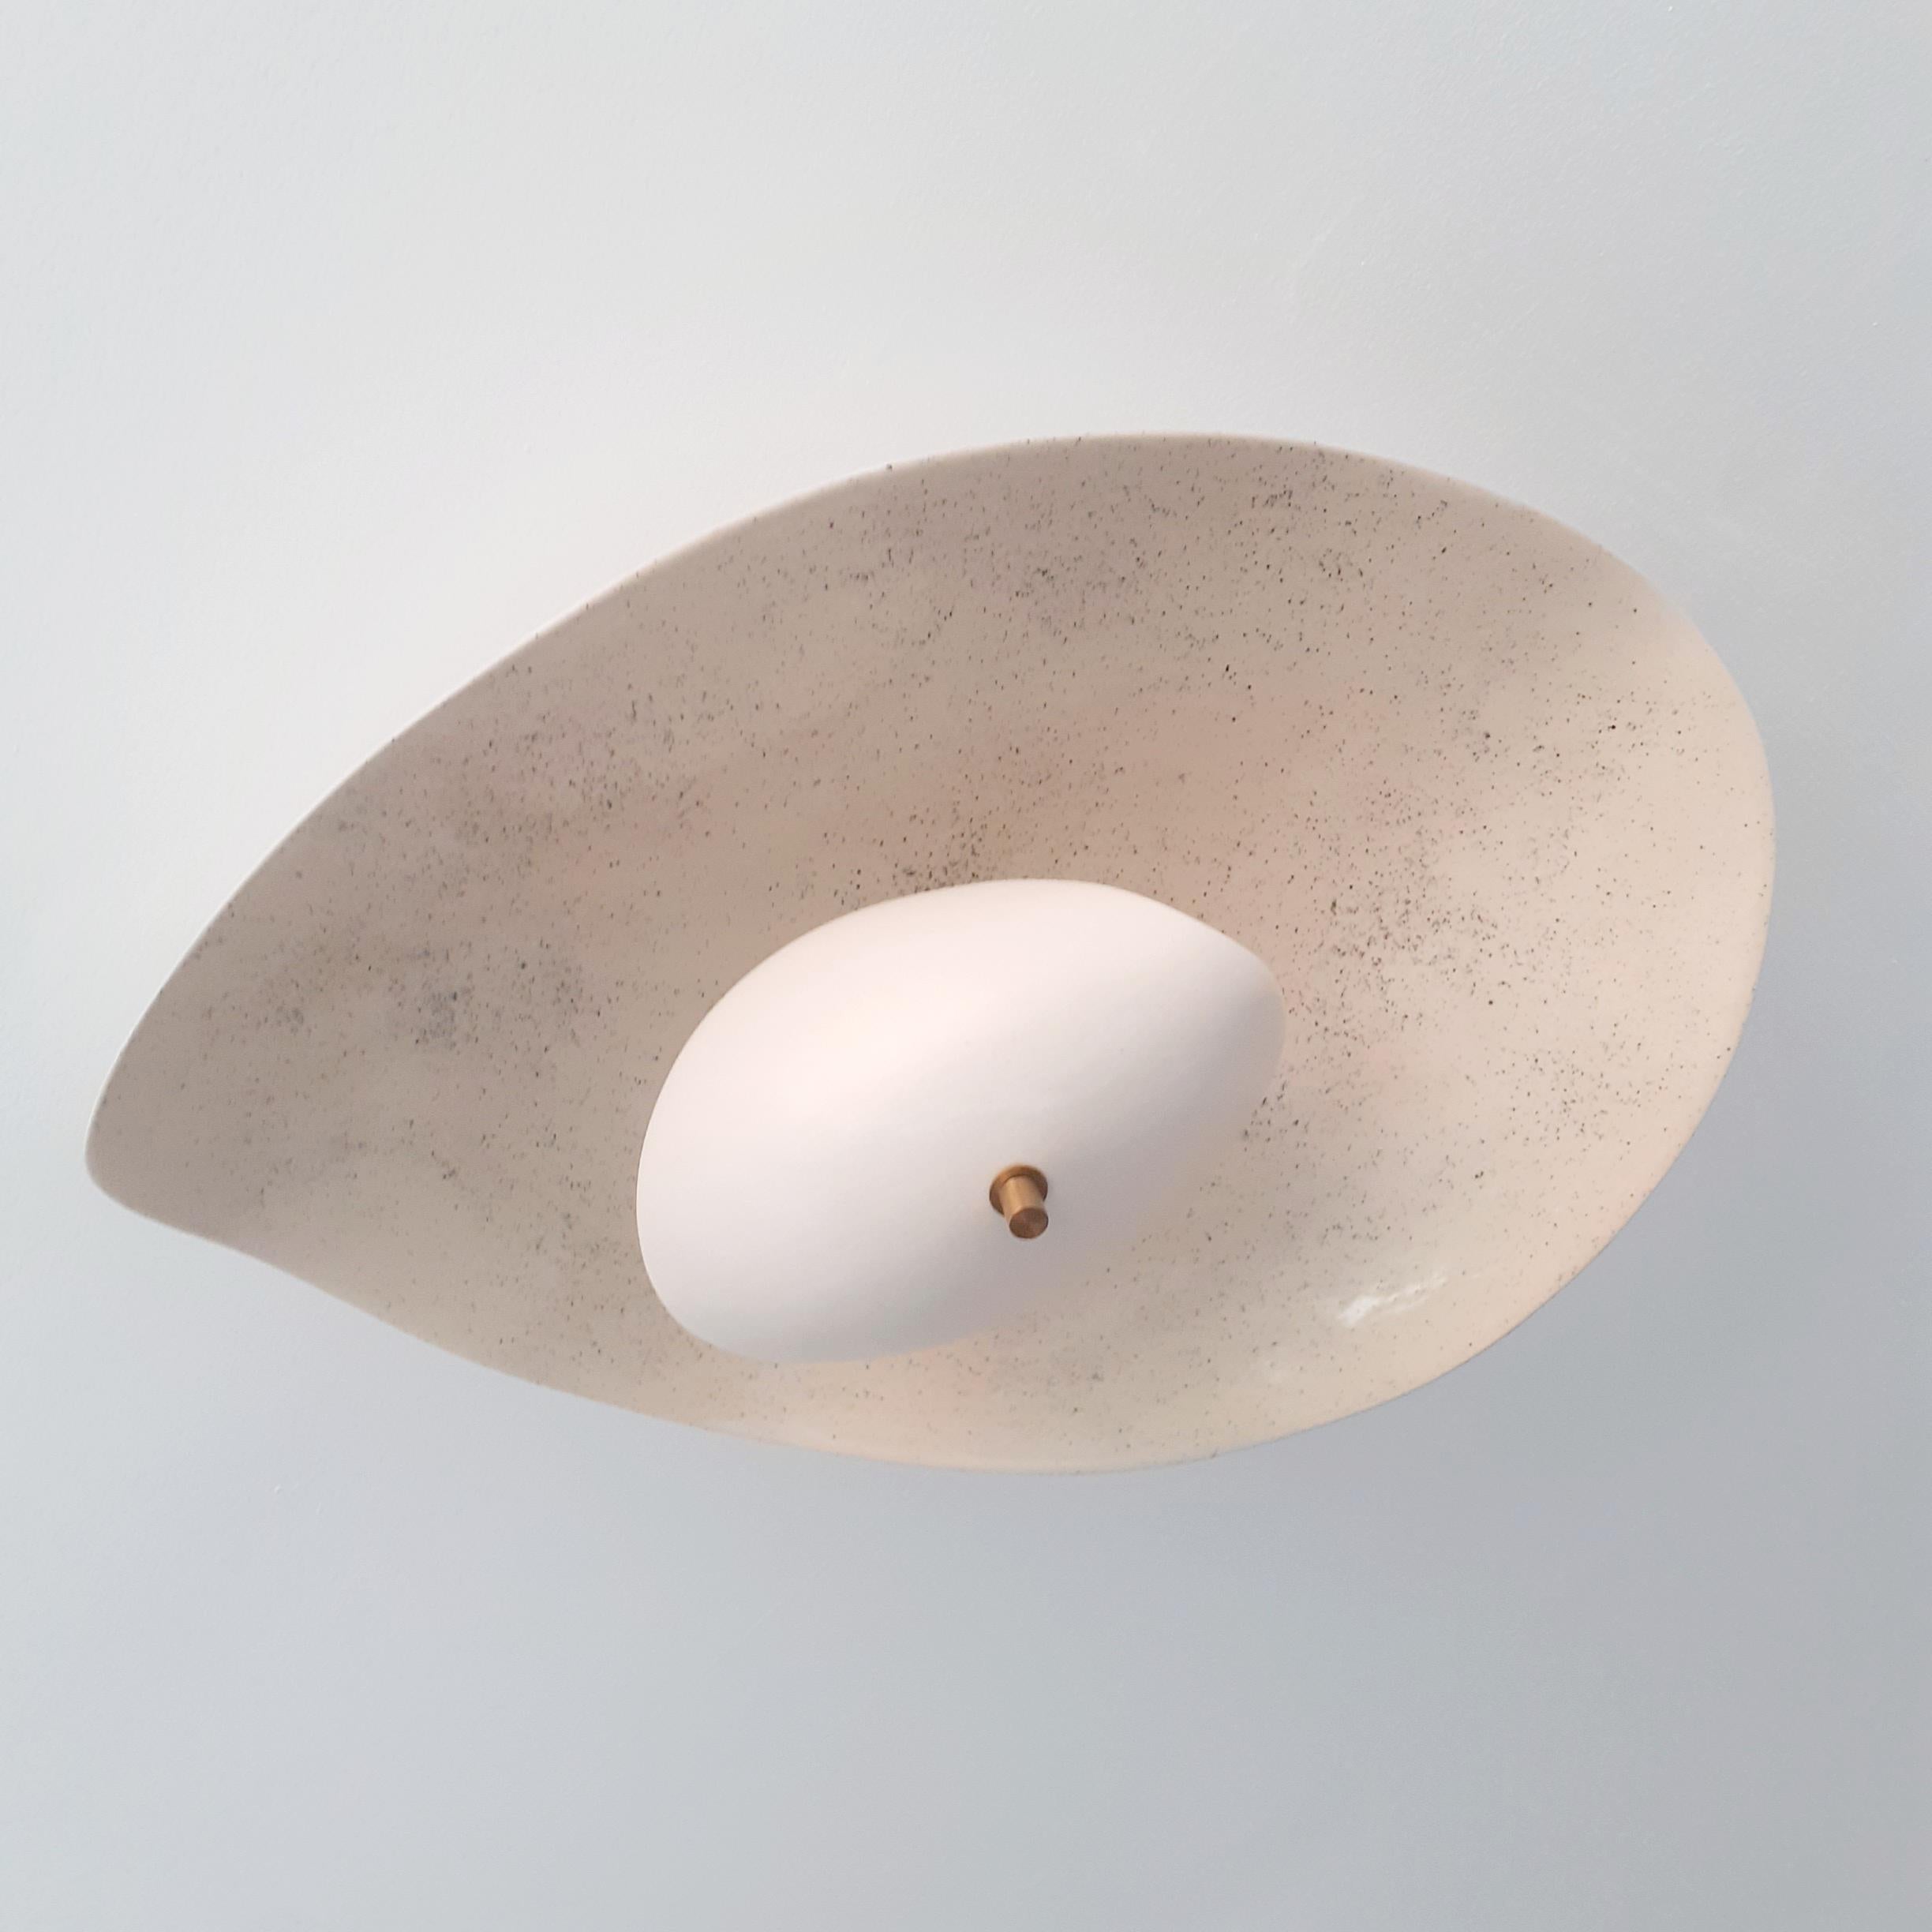 Ceramic ceiling light with airy design.
Brass structure and enameled ceramic handmade in Parisian worksop by Elsa Foulon Studio.
Custom-made on request.